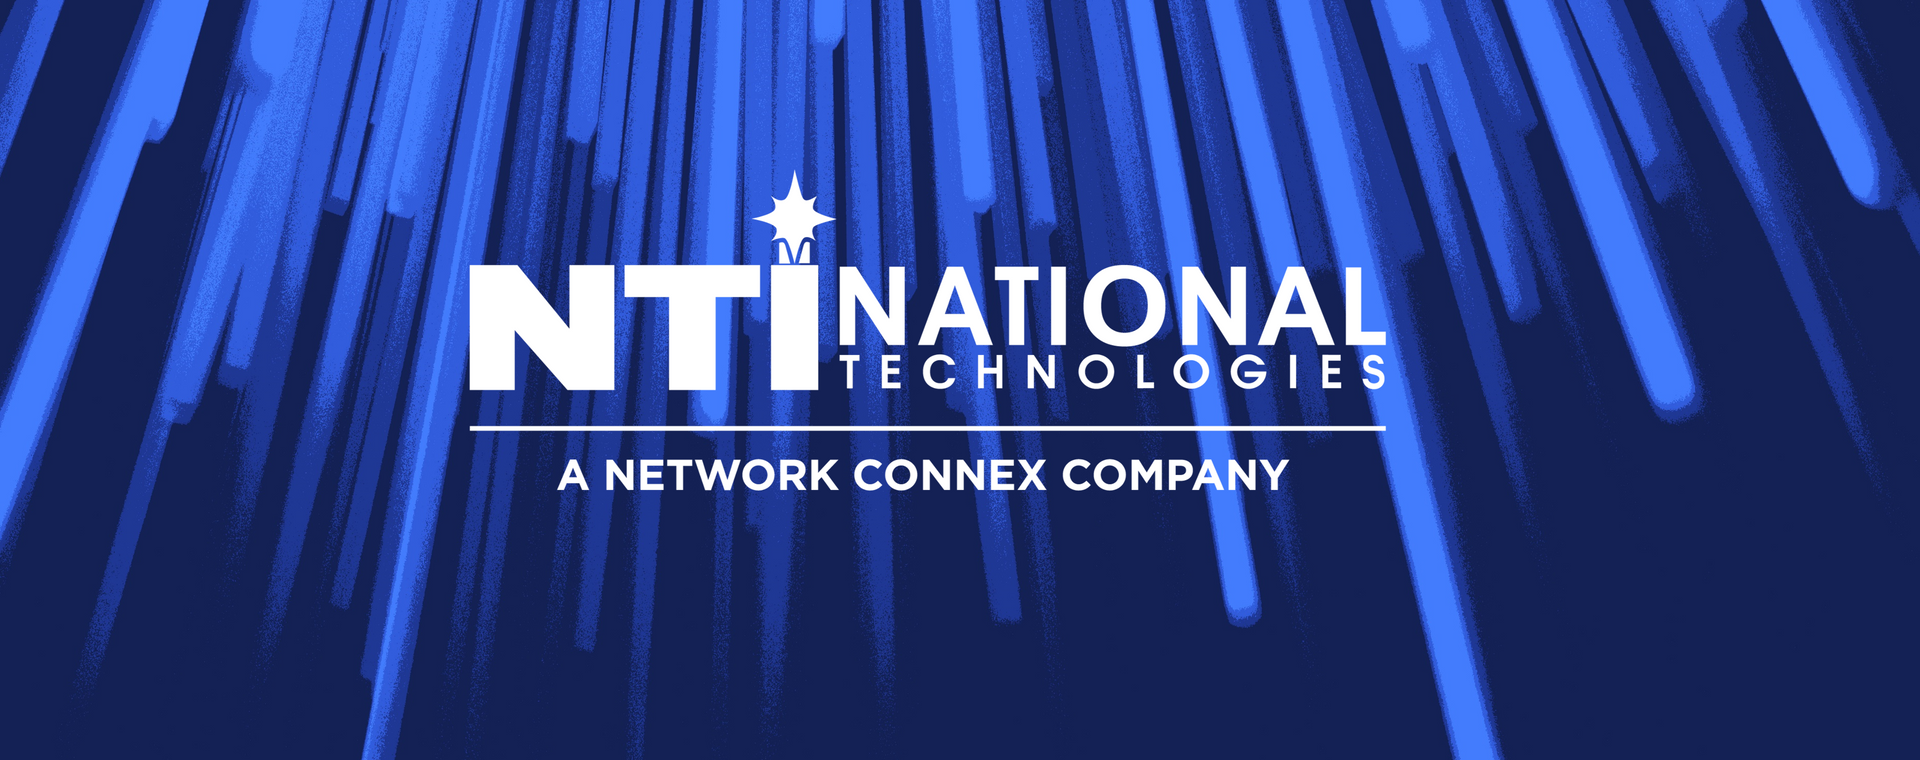 NTI, a Network Connex company,  specializes in fiber optics and data center communications infrastructure